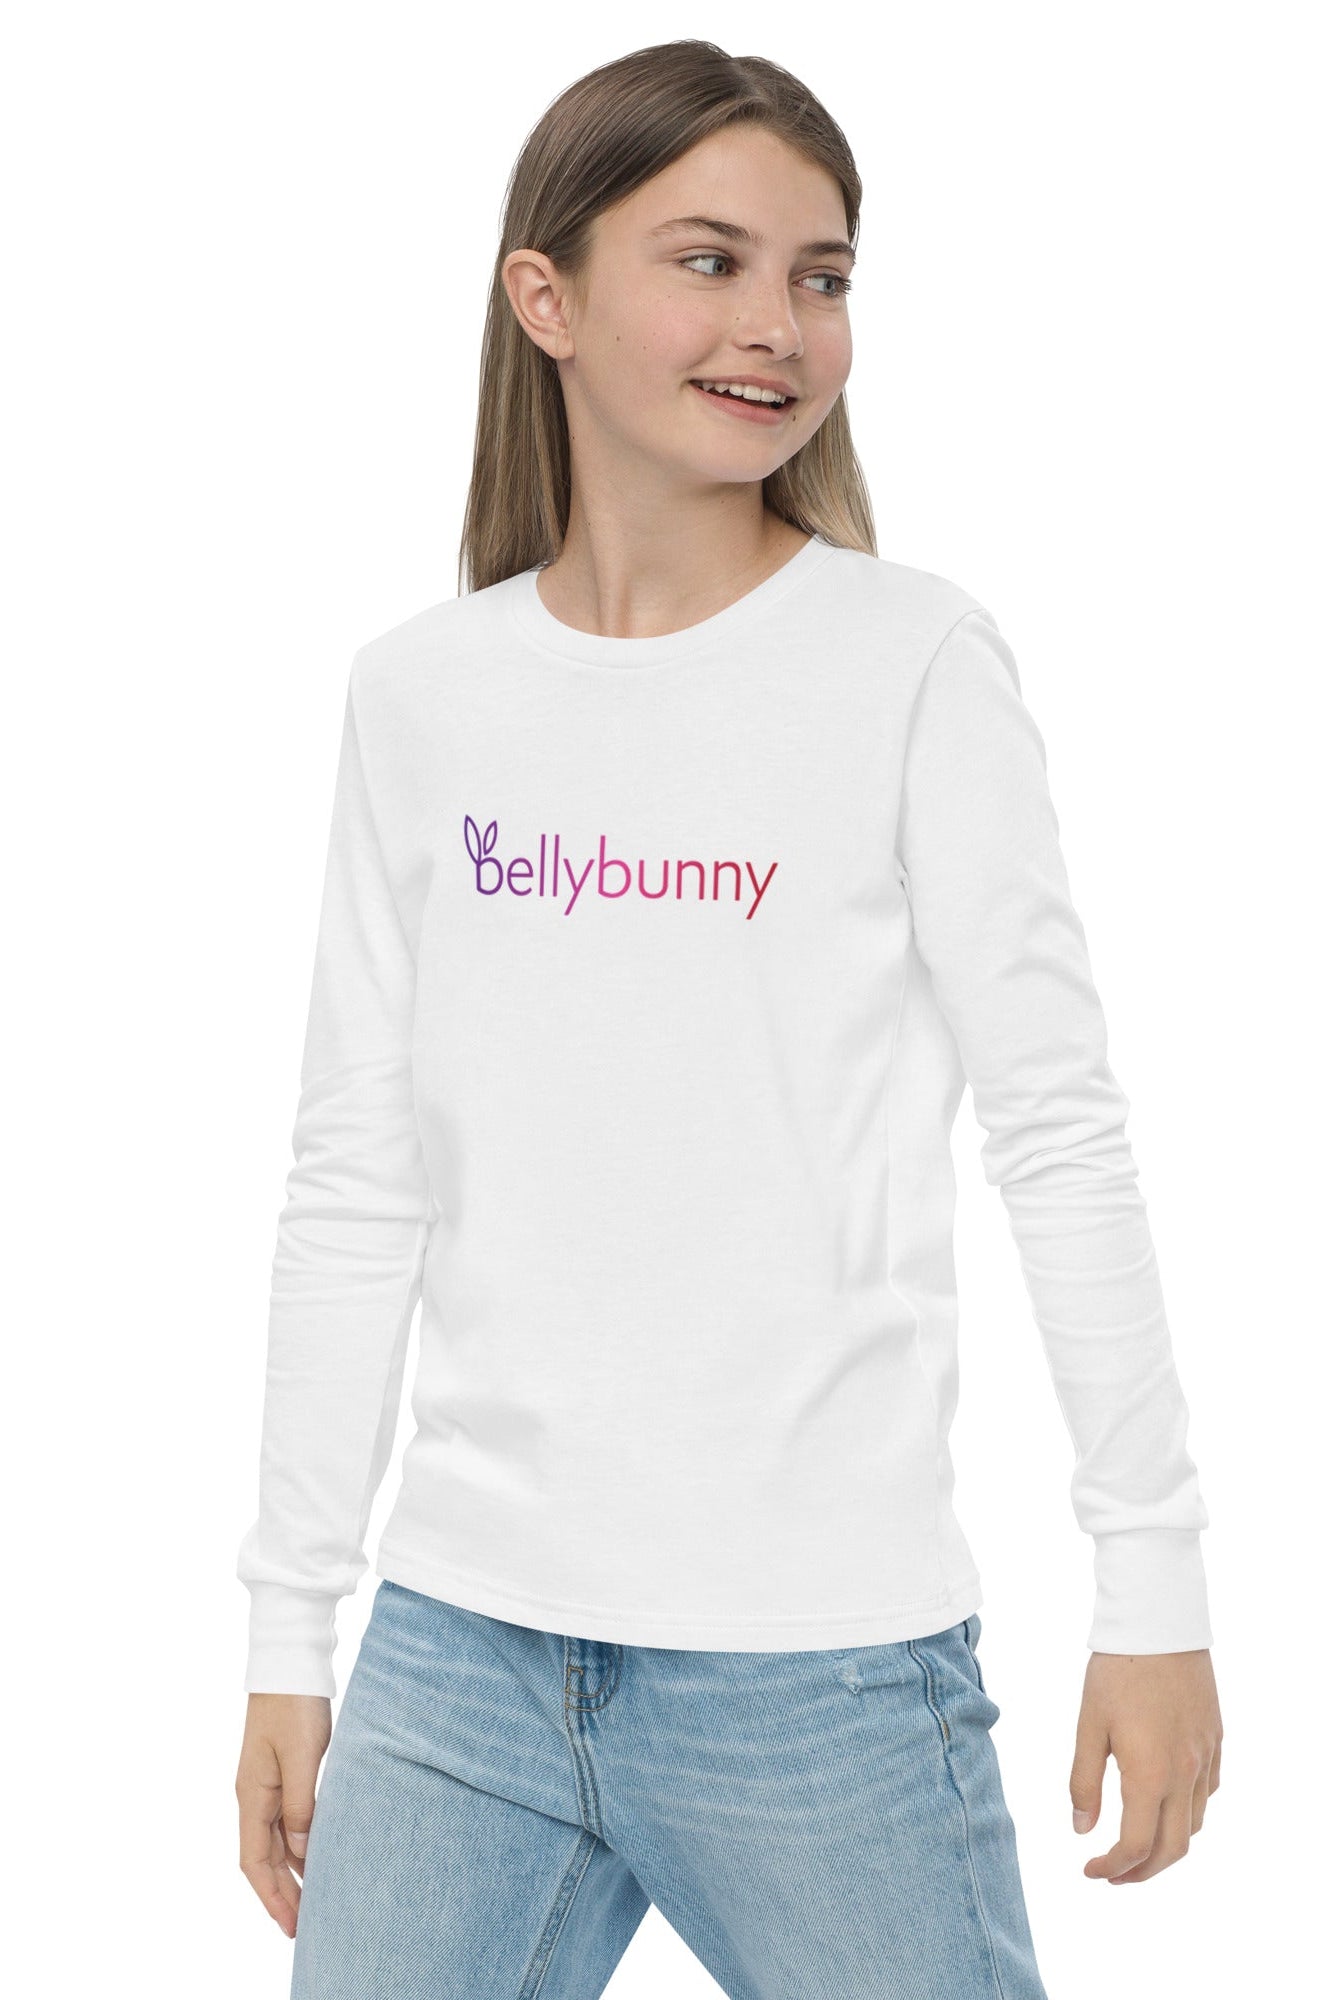 Bellybunny-Youth Long Sleeve T-Shirt-white with rainbow logo